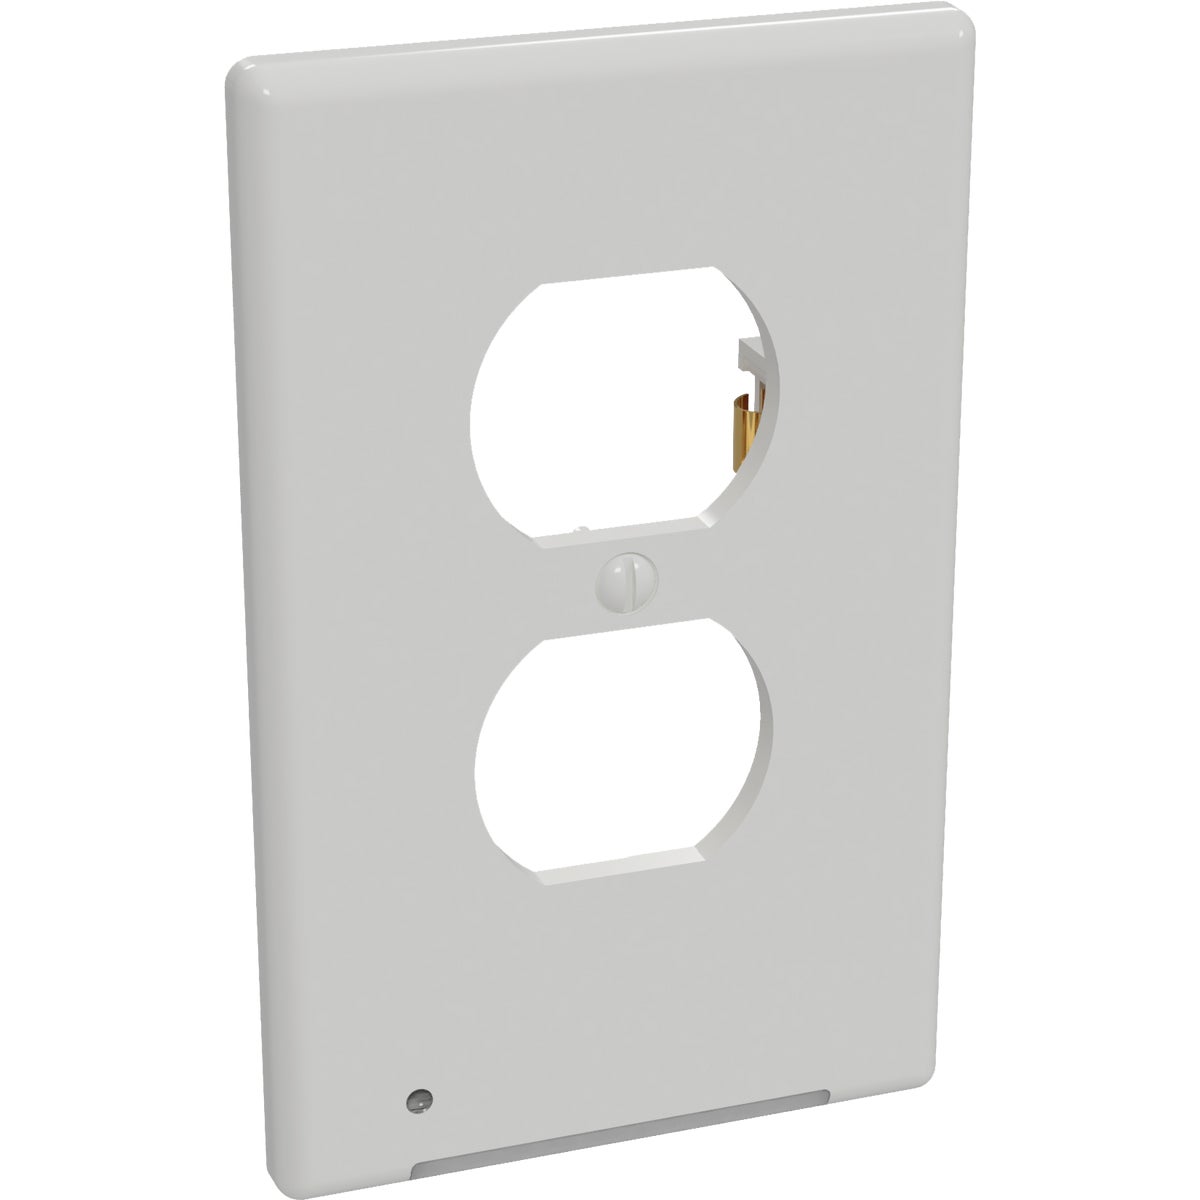 Item 522541, Duplex nightlight wall plate. Converts any outlet into a nightlight.